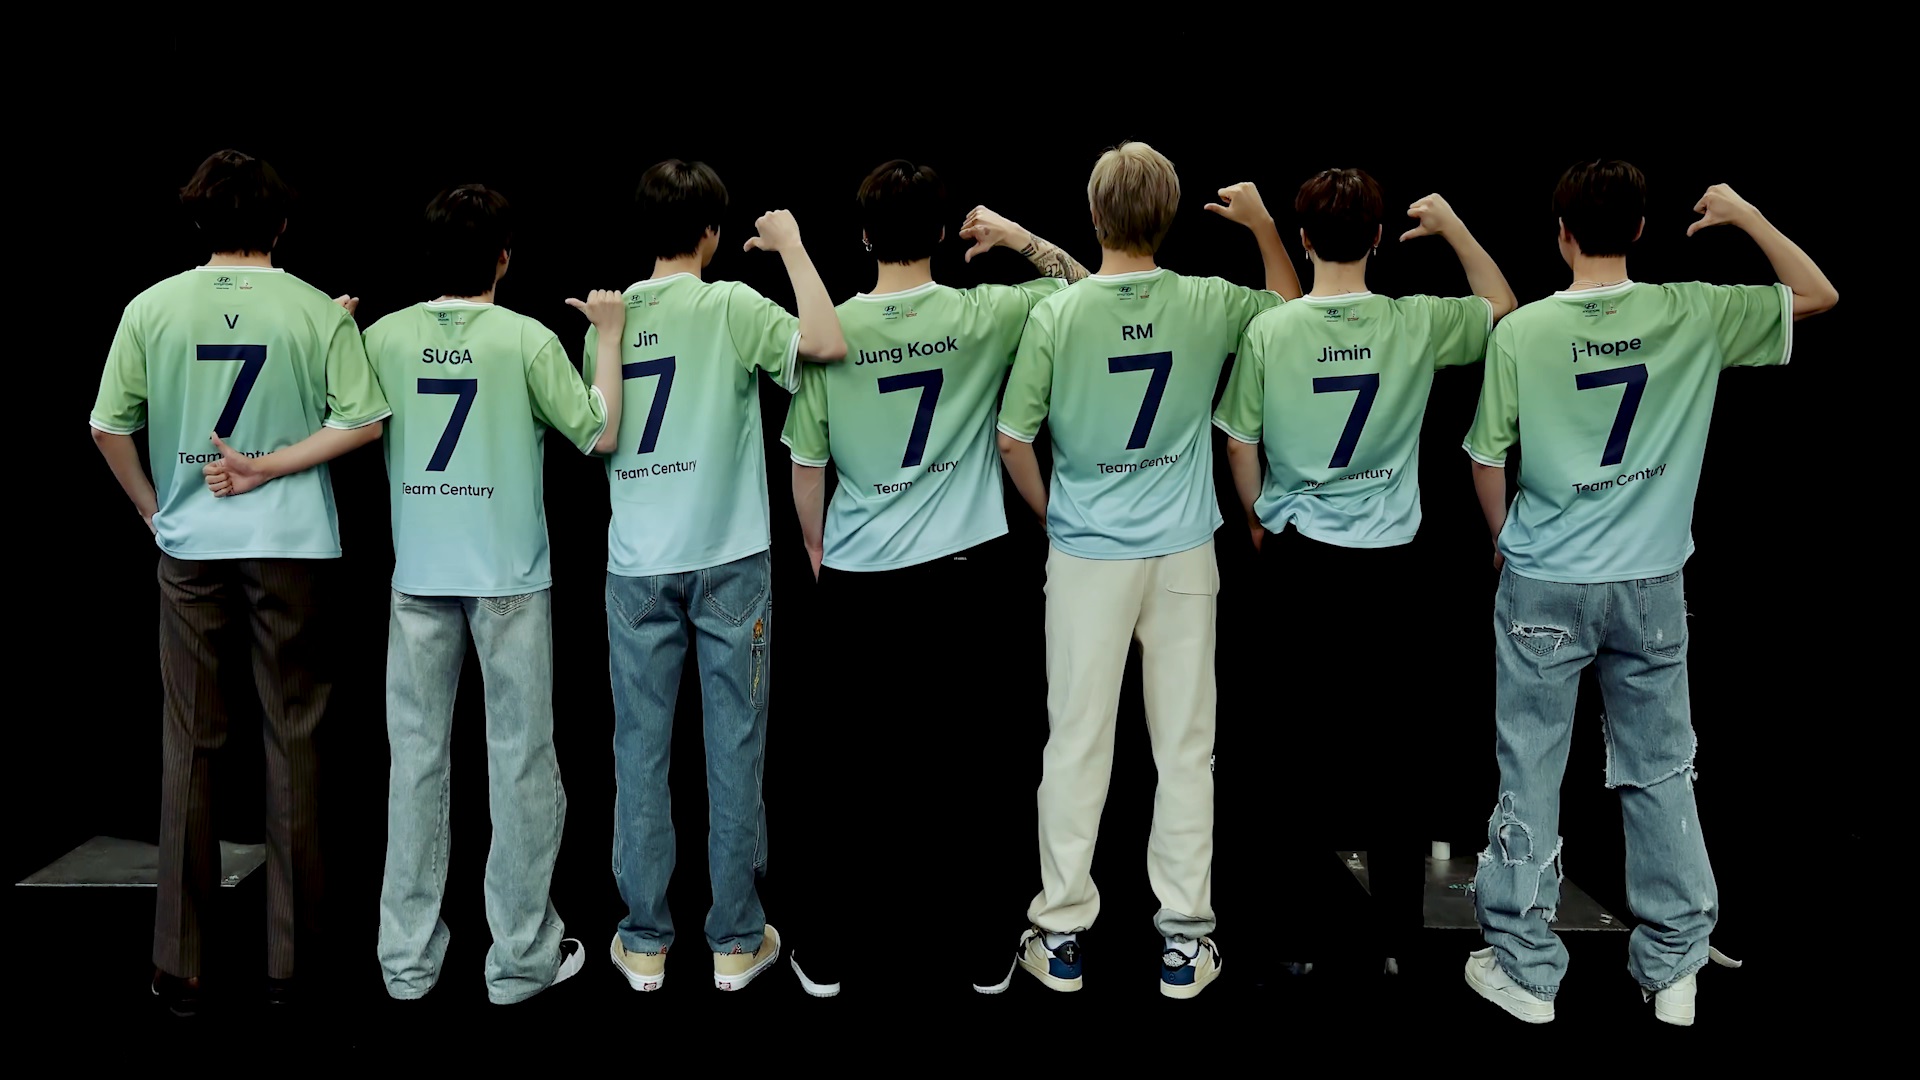 BTS's New Jersey Number for the Team